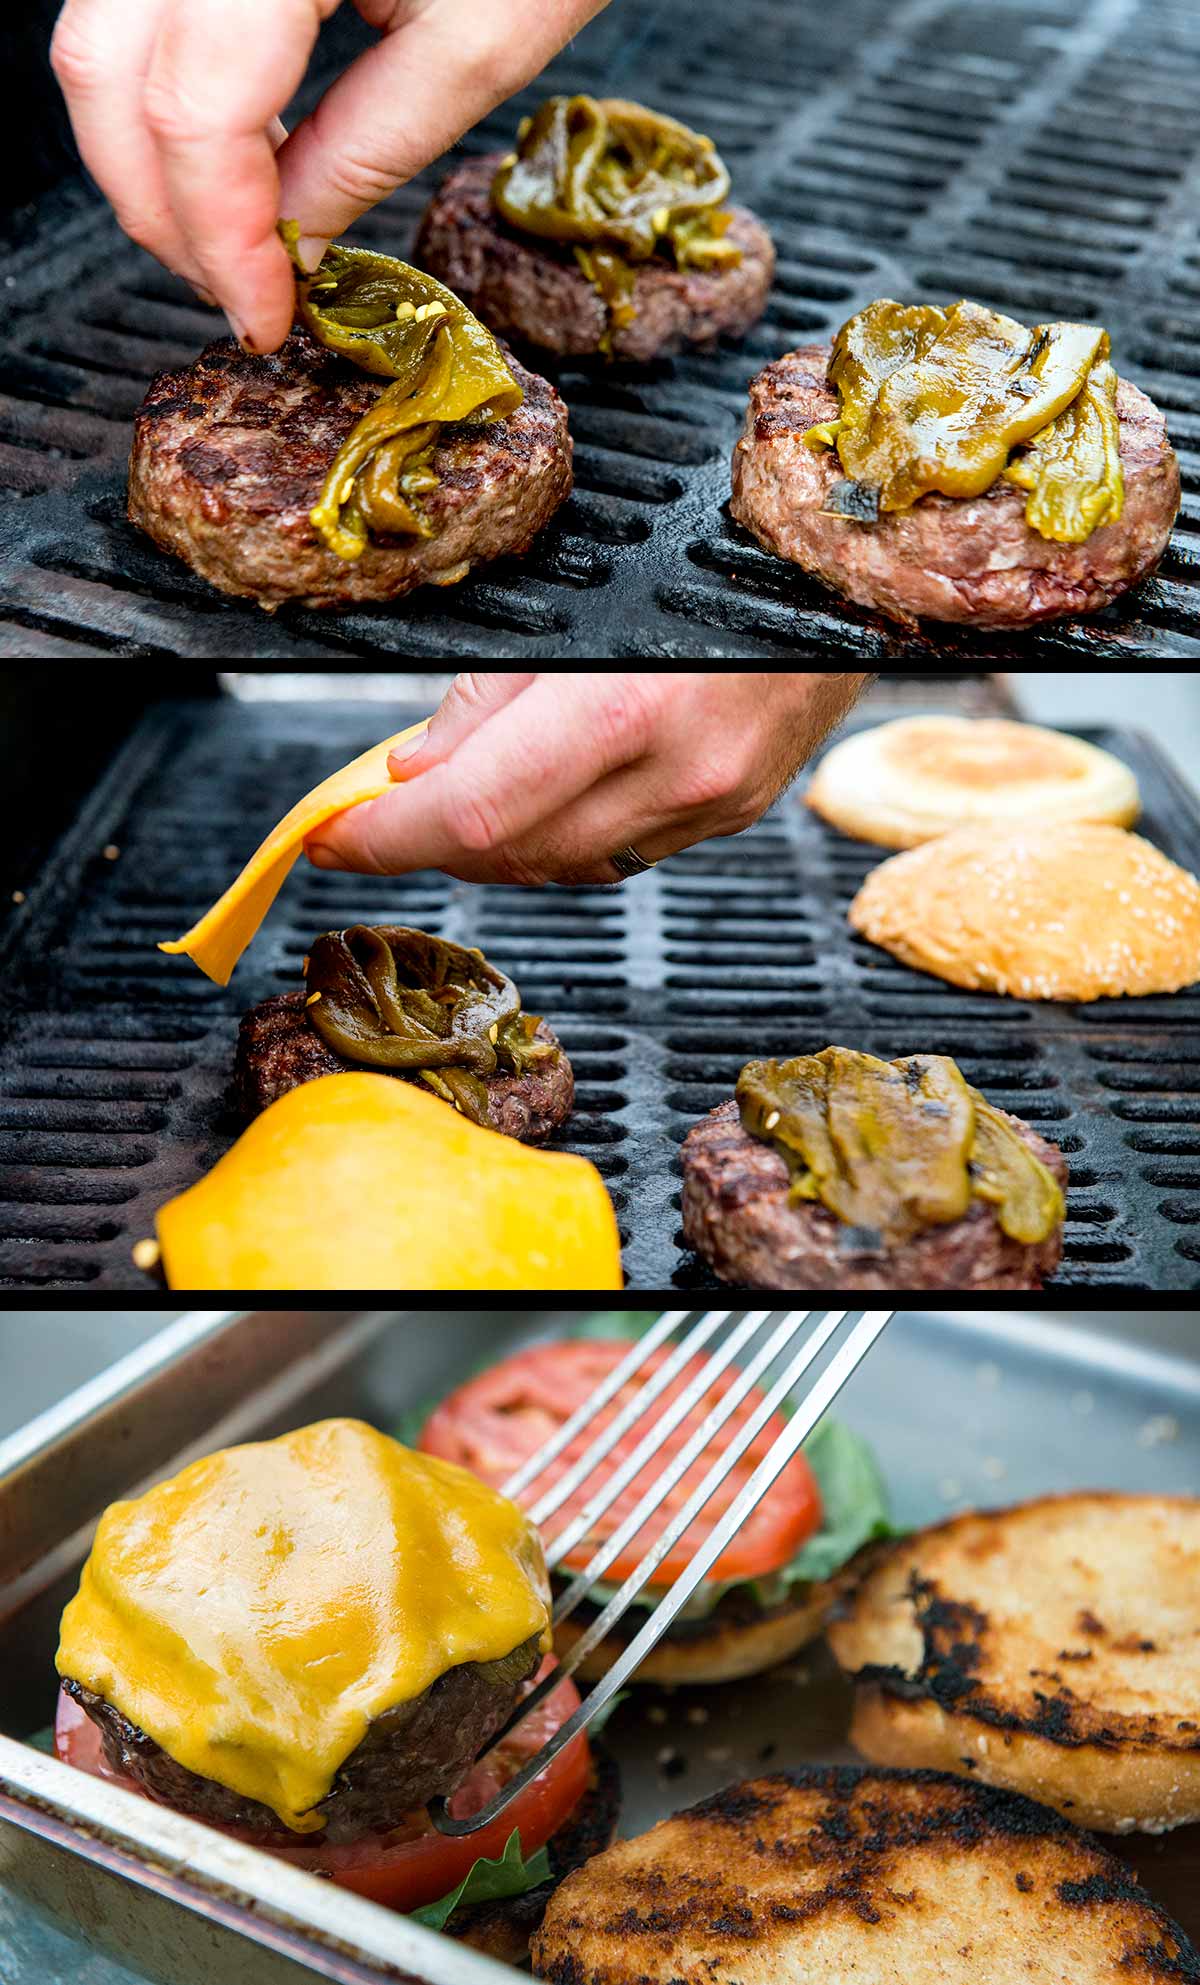 Building an elk burger in three images